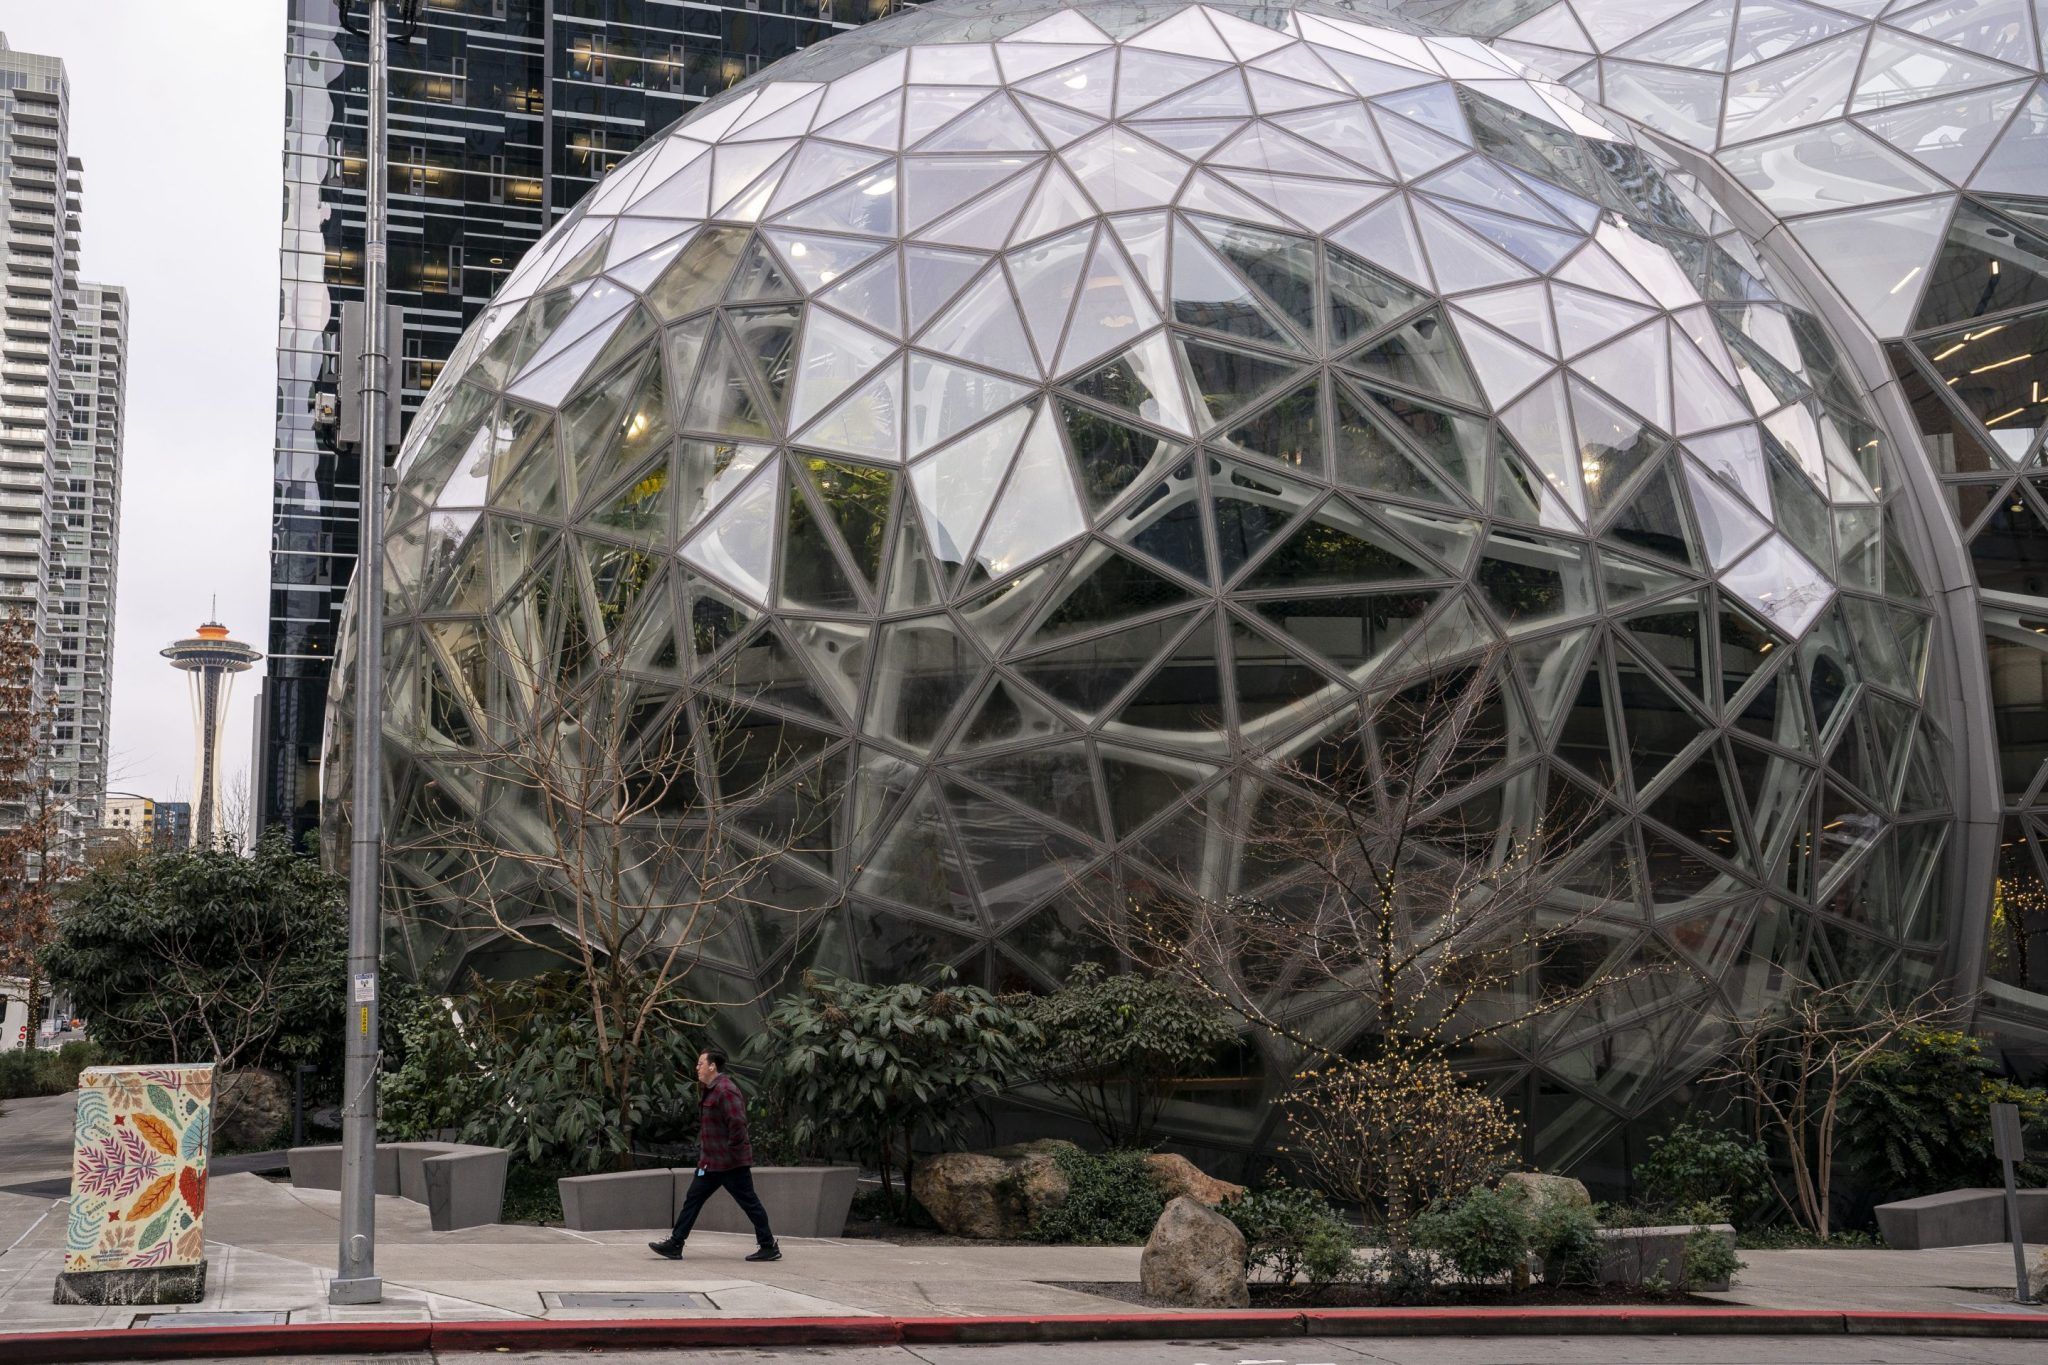 Amazon slowed hiring and conducted layoffs in its HR…